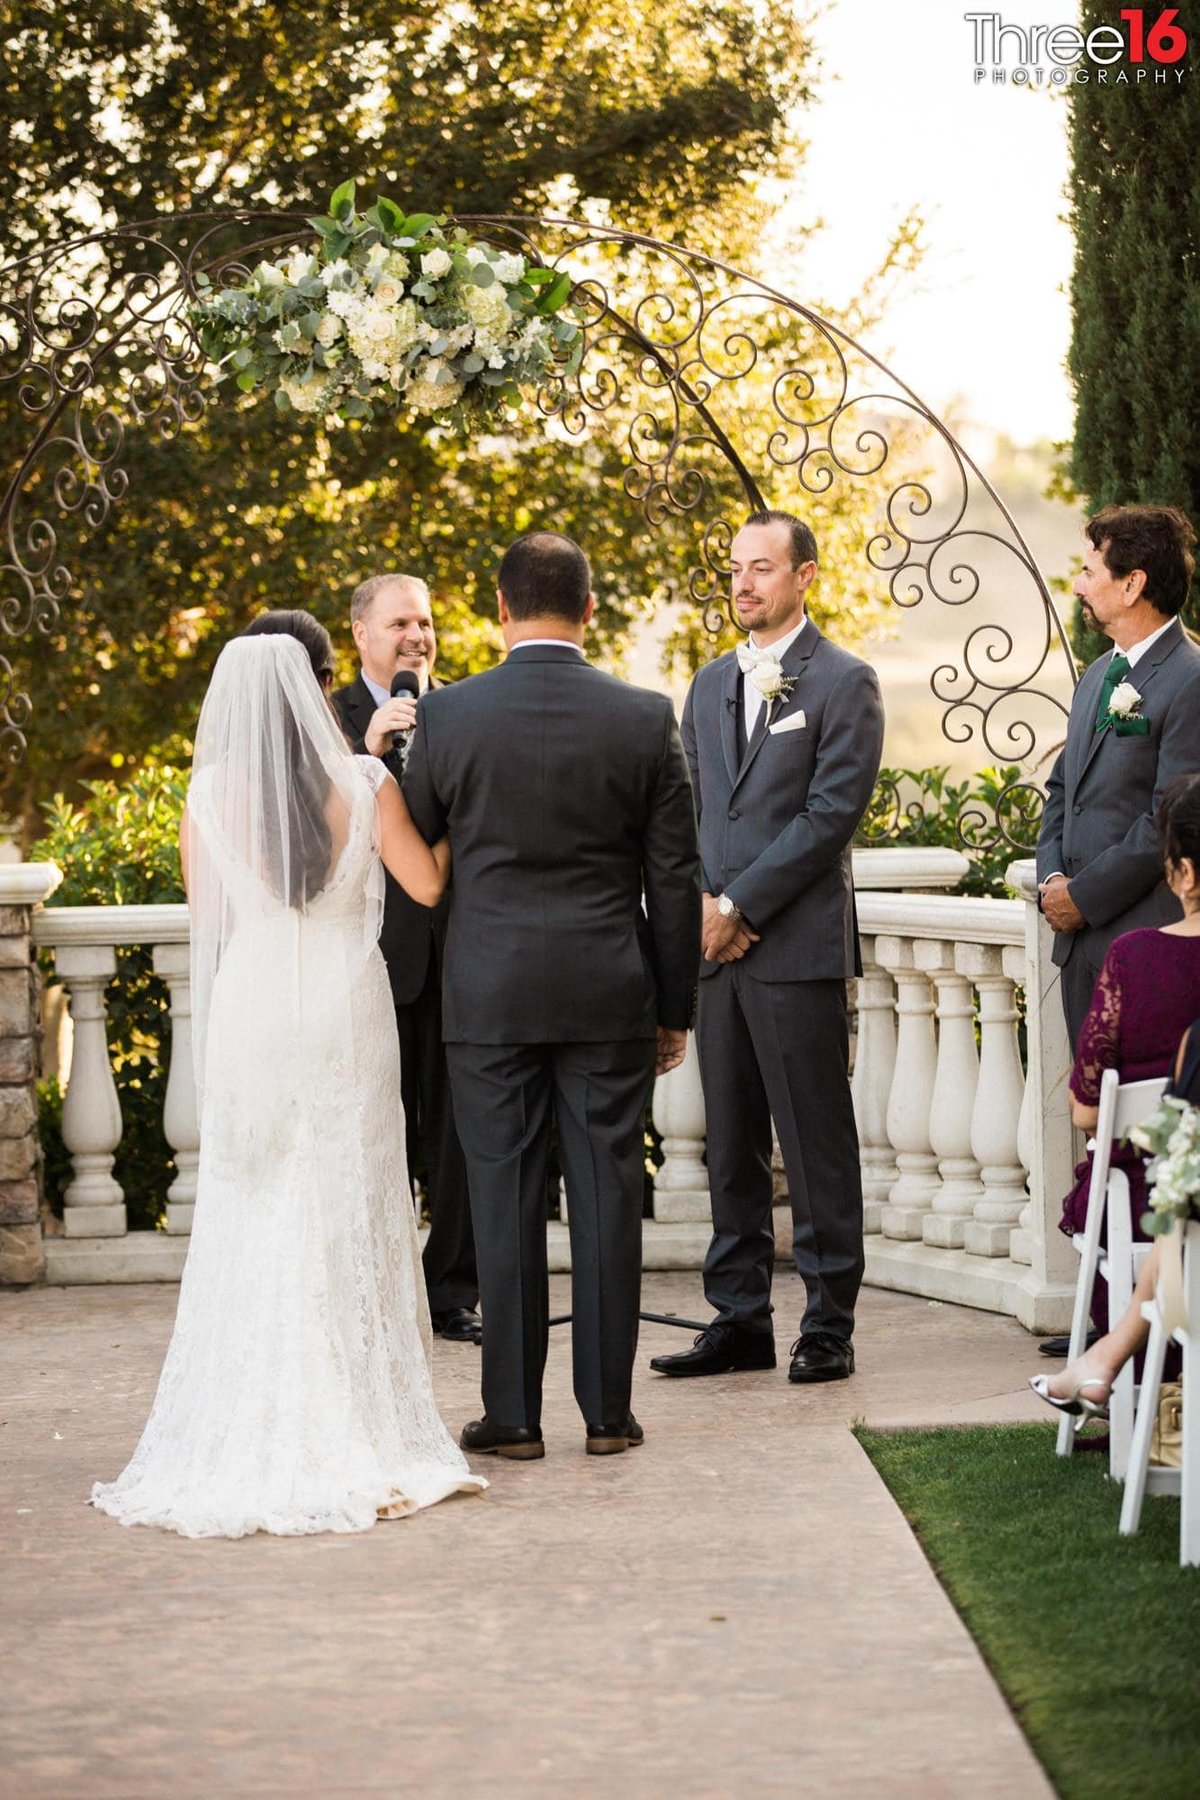 Wedding  Ceremony taking place at Wedgewood Vellano Country Club in Chino Hills, CA